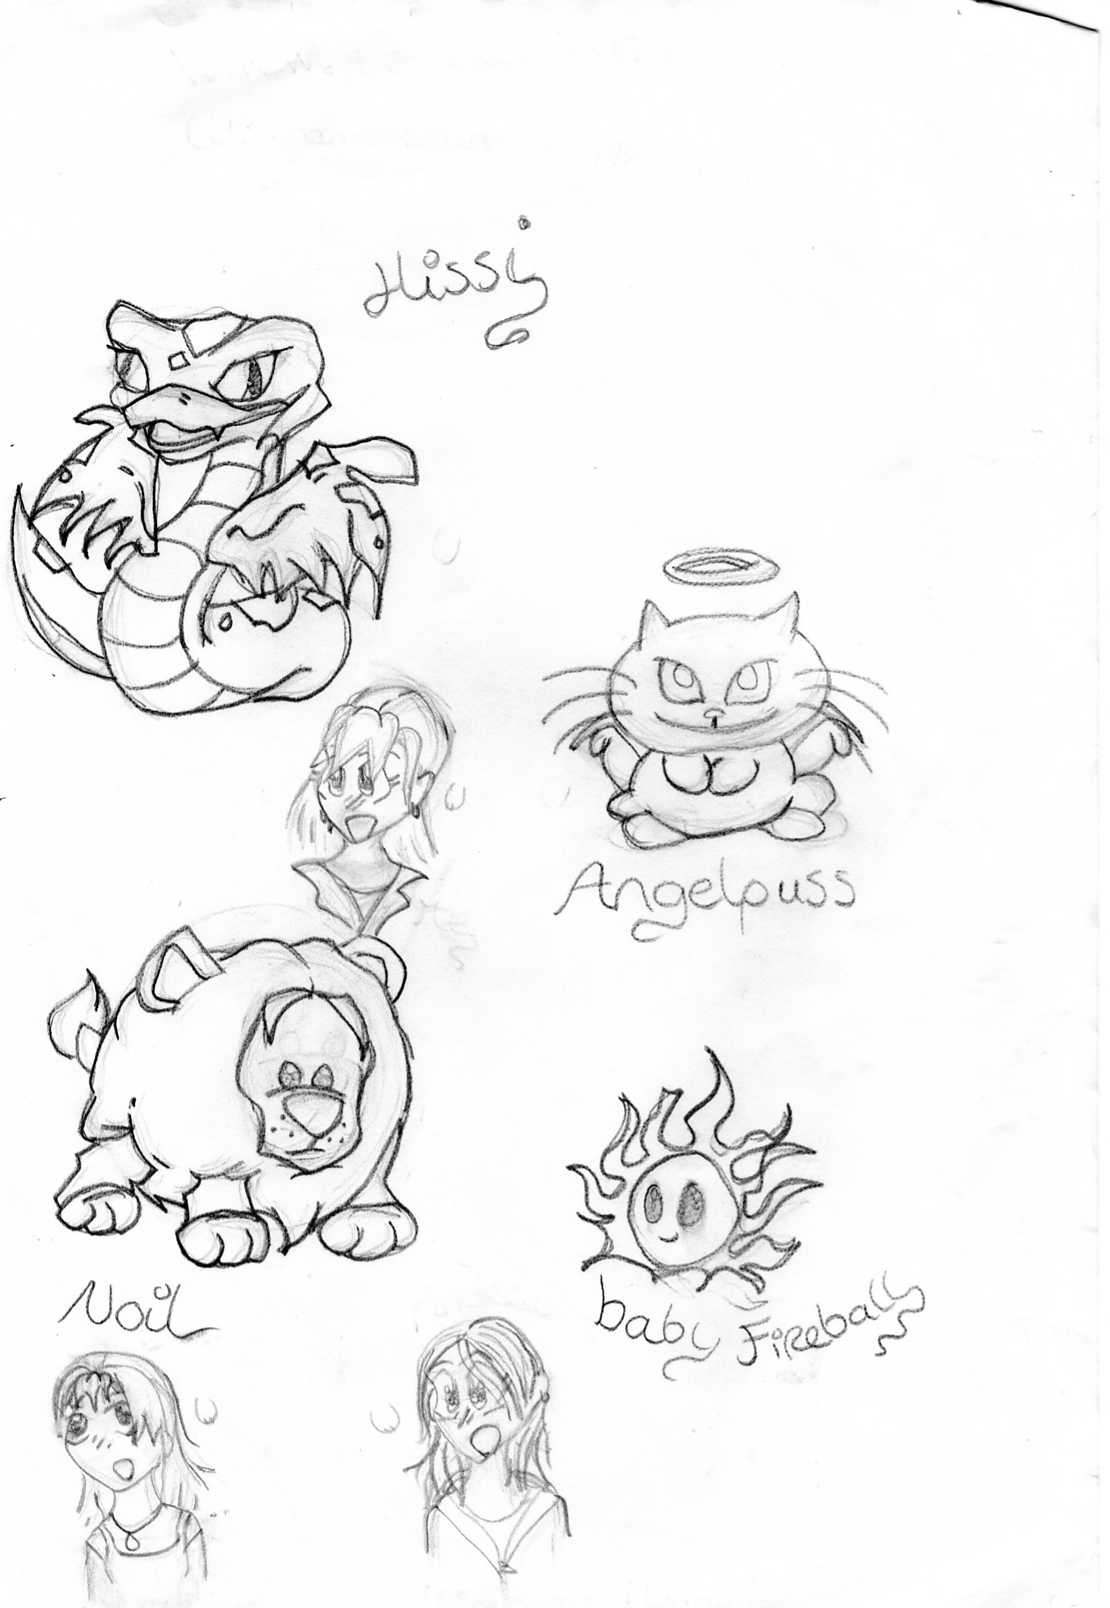 some neopets by heb_geen_idee